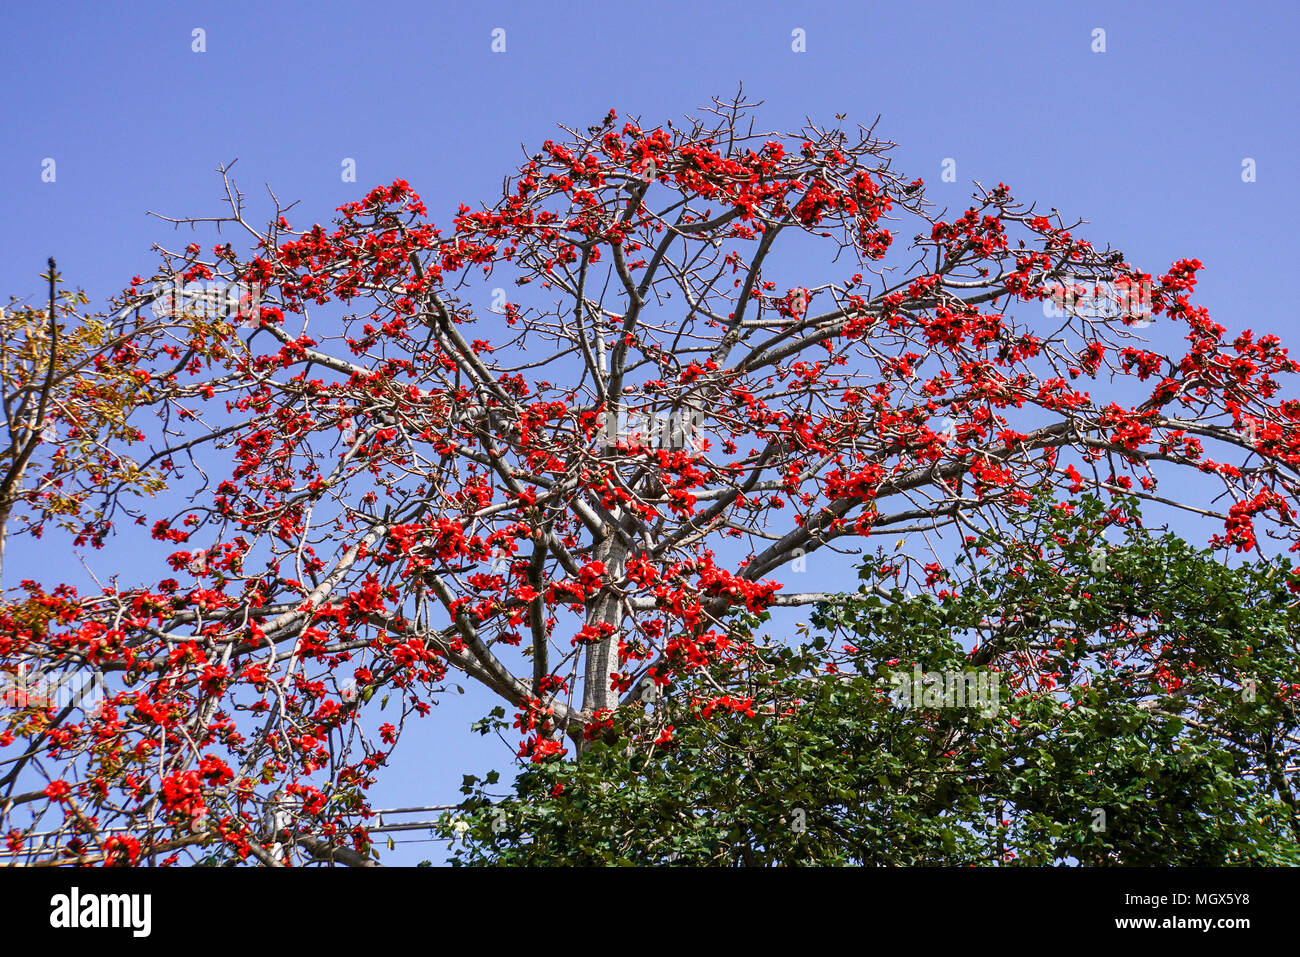 Close up of the red flower of the Delonix regia tree (AKA royal poinciana, flamboyant or flame tree) Stock Photo